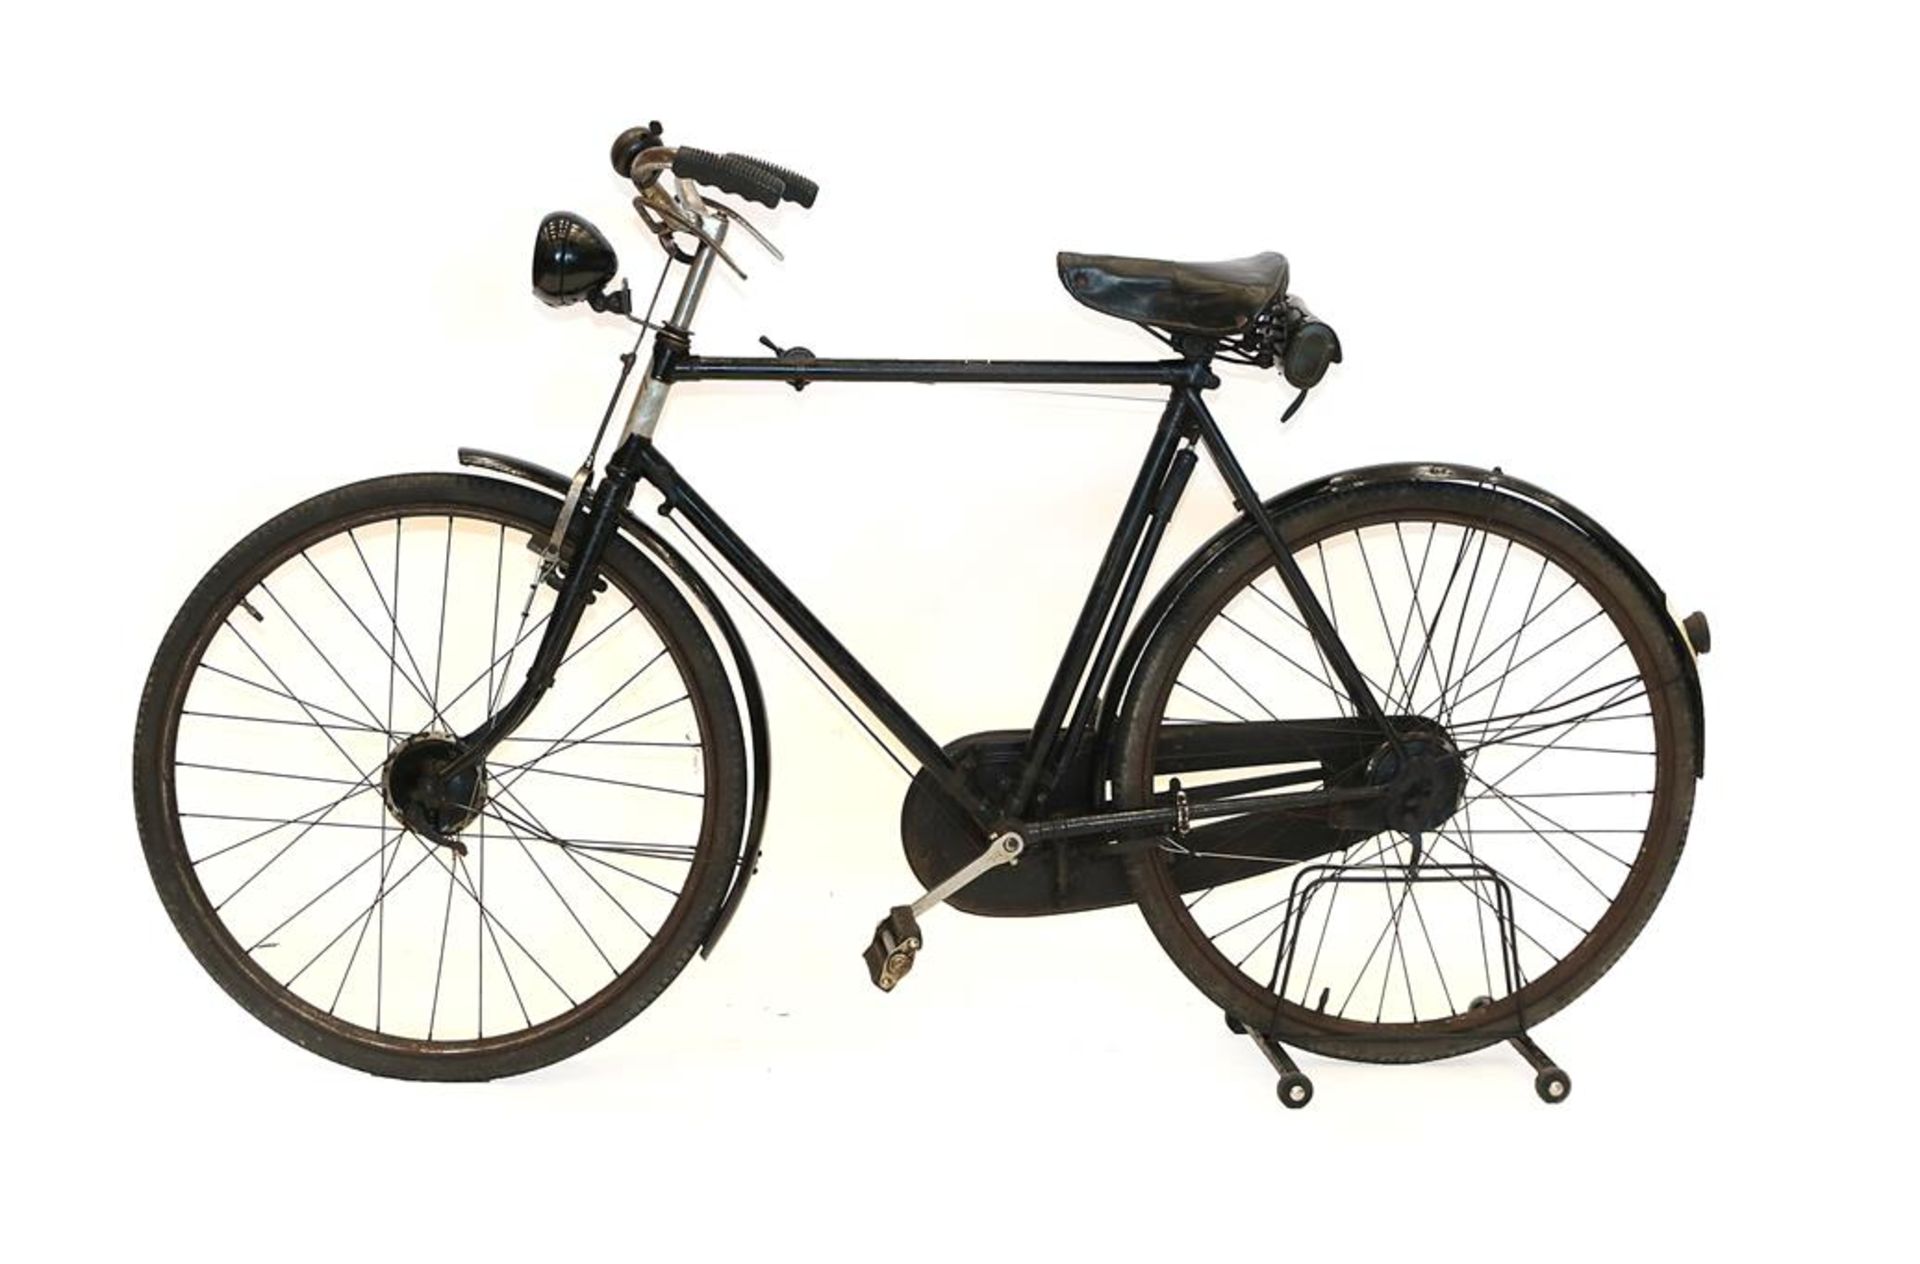 A 1930's BSA Gent`s Bicycle Possibly Model Number 55, with chromed curved handle bars, bell and